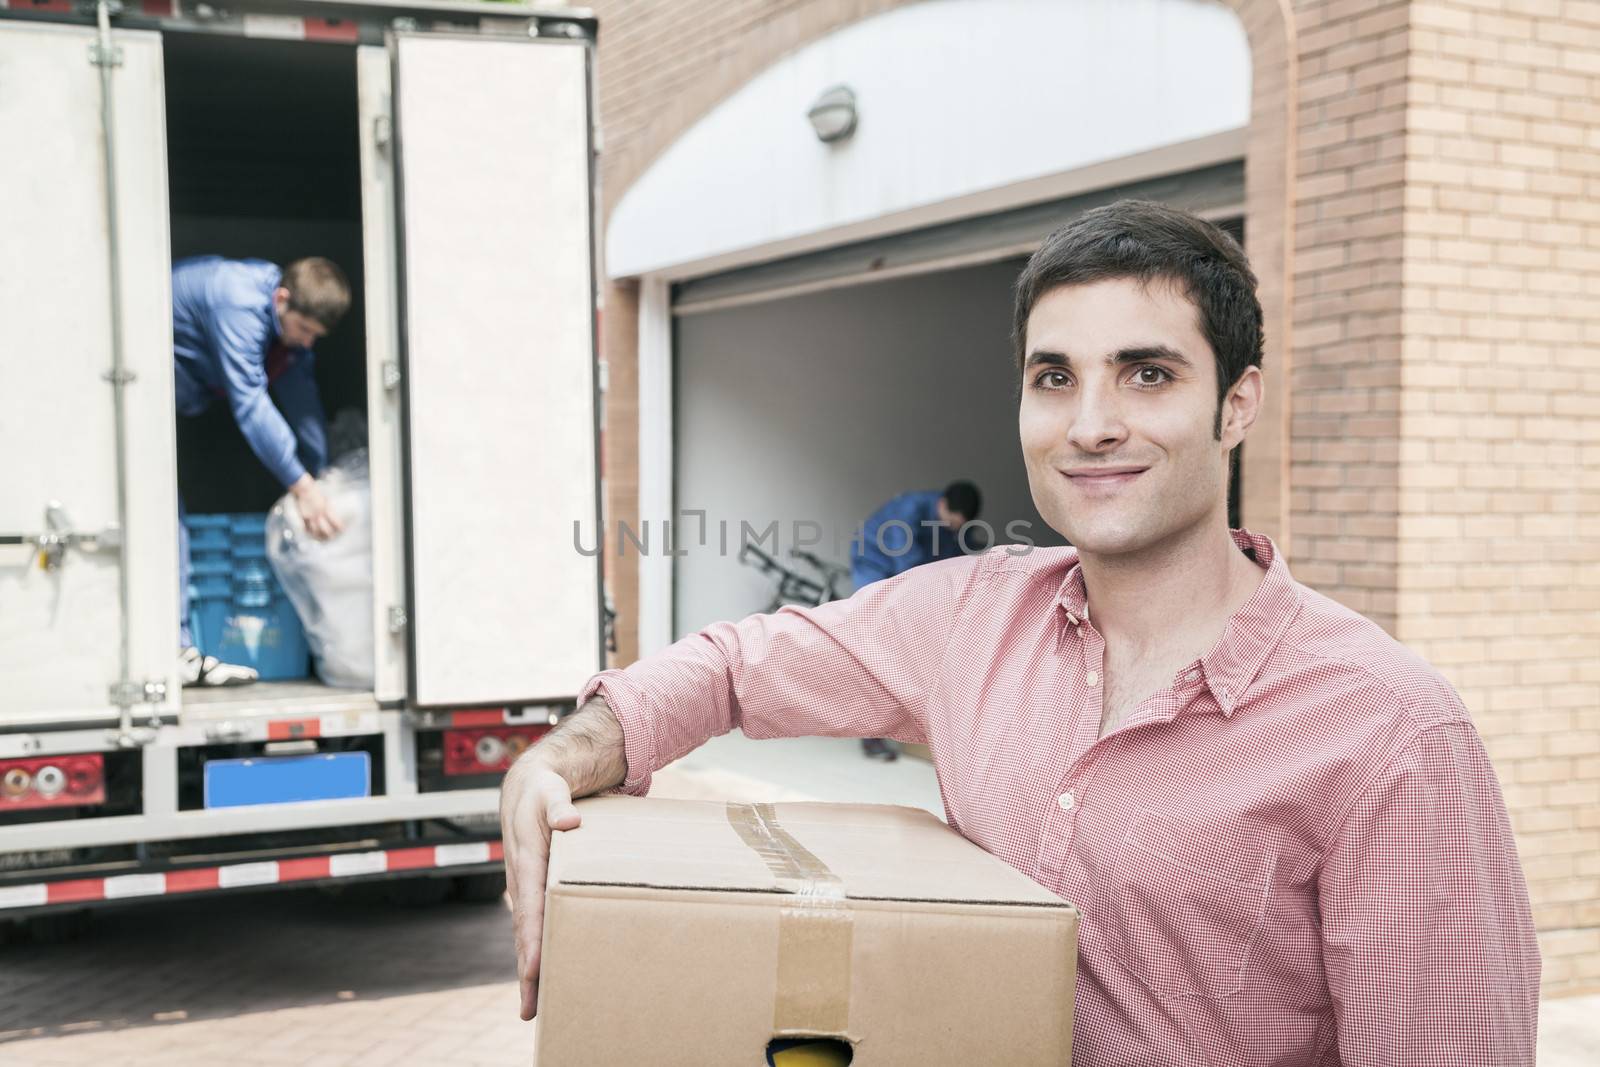 Smiling man holding a cardboard box and moving into his new home